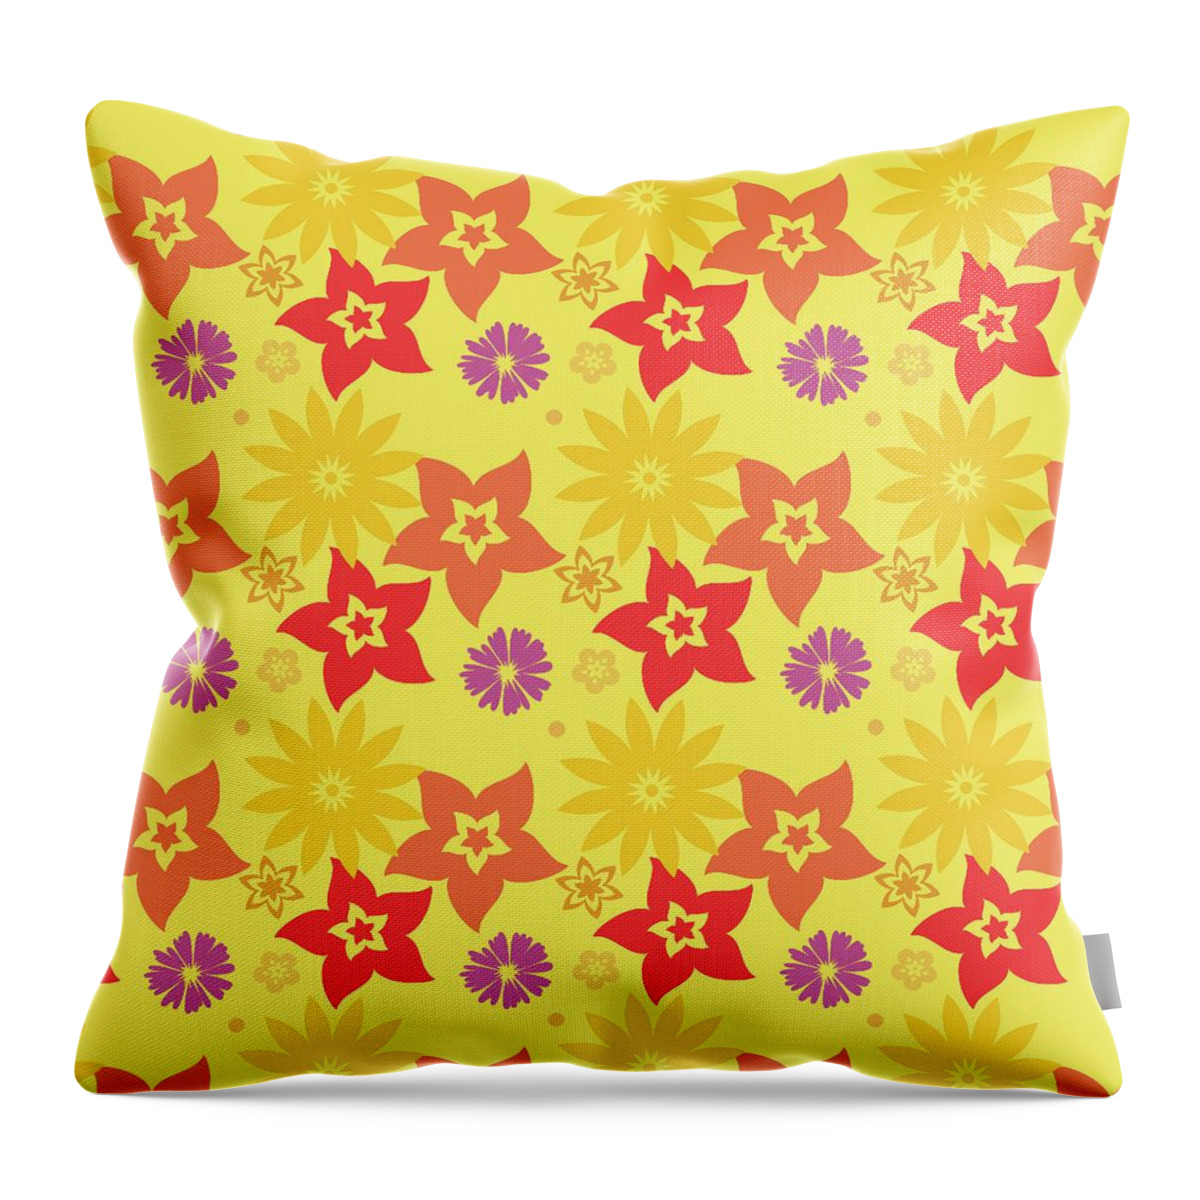 Tropical Throw Pillow featuring the digital art Sunny Flowers by Becky Herrera